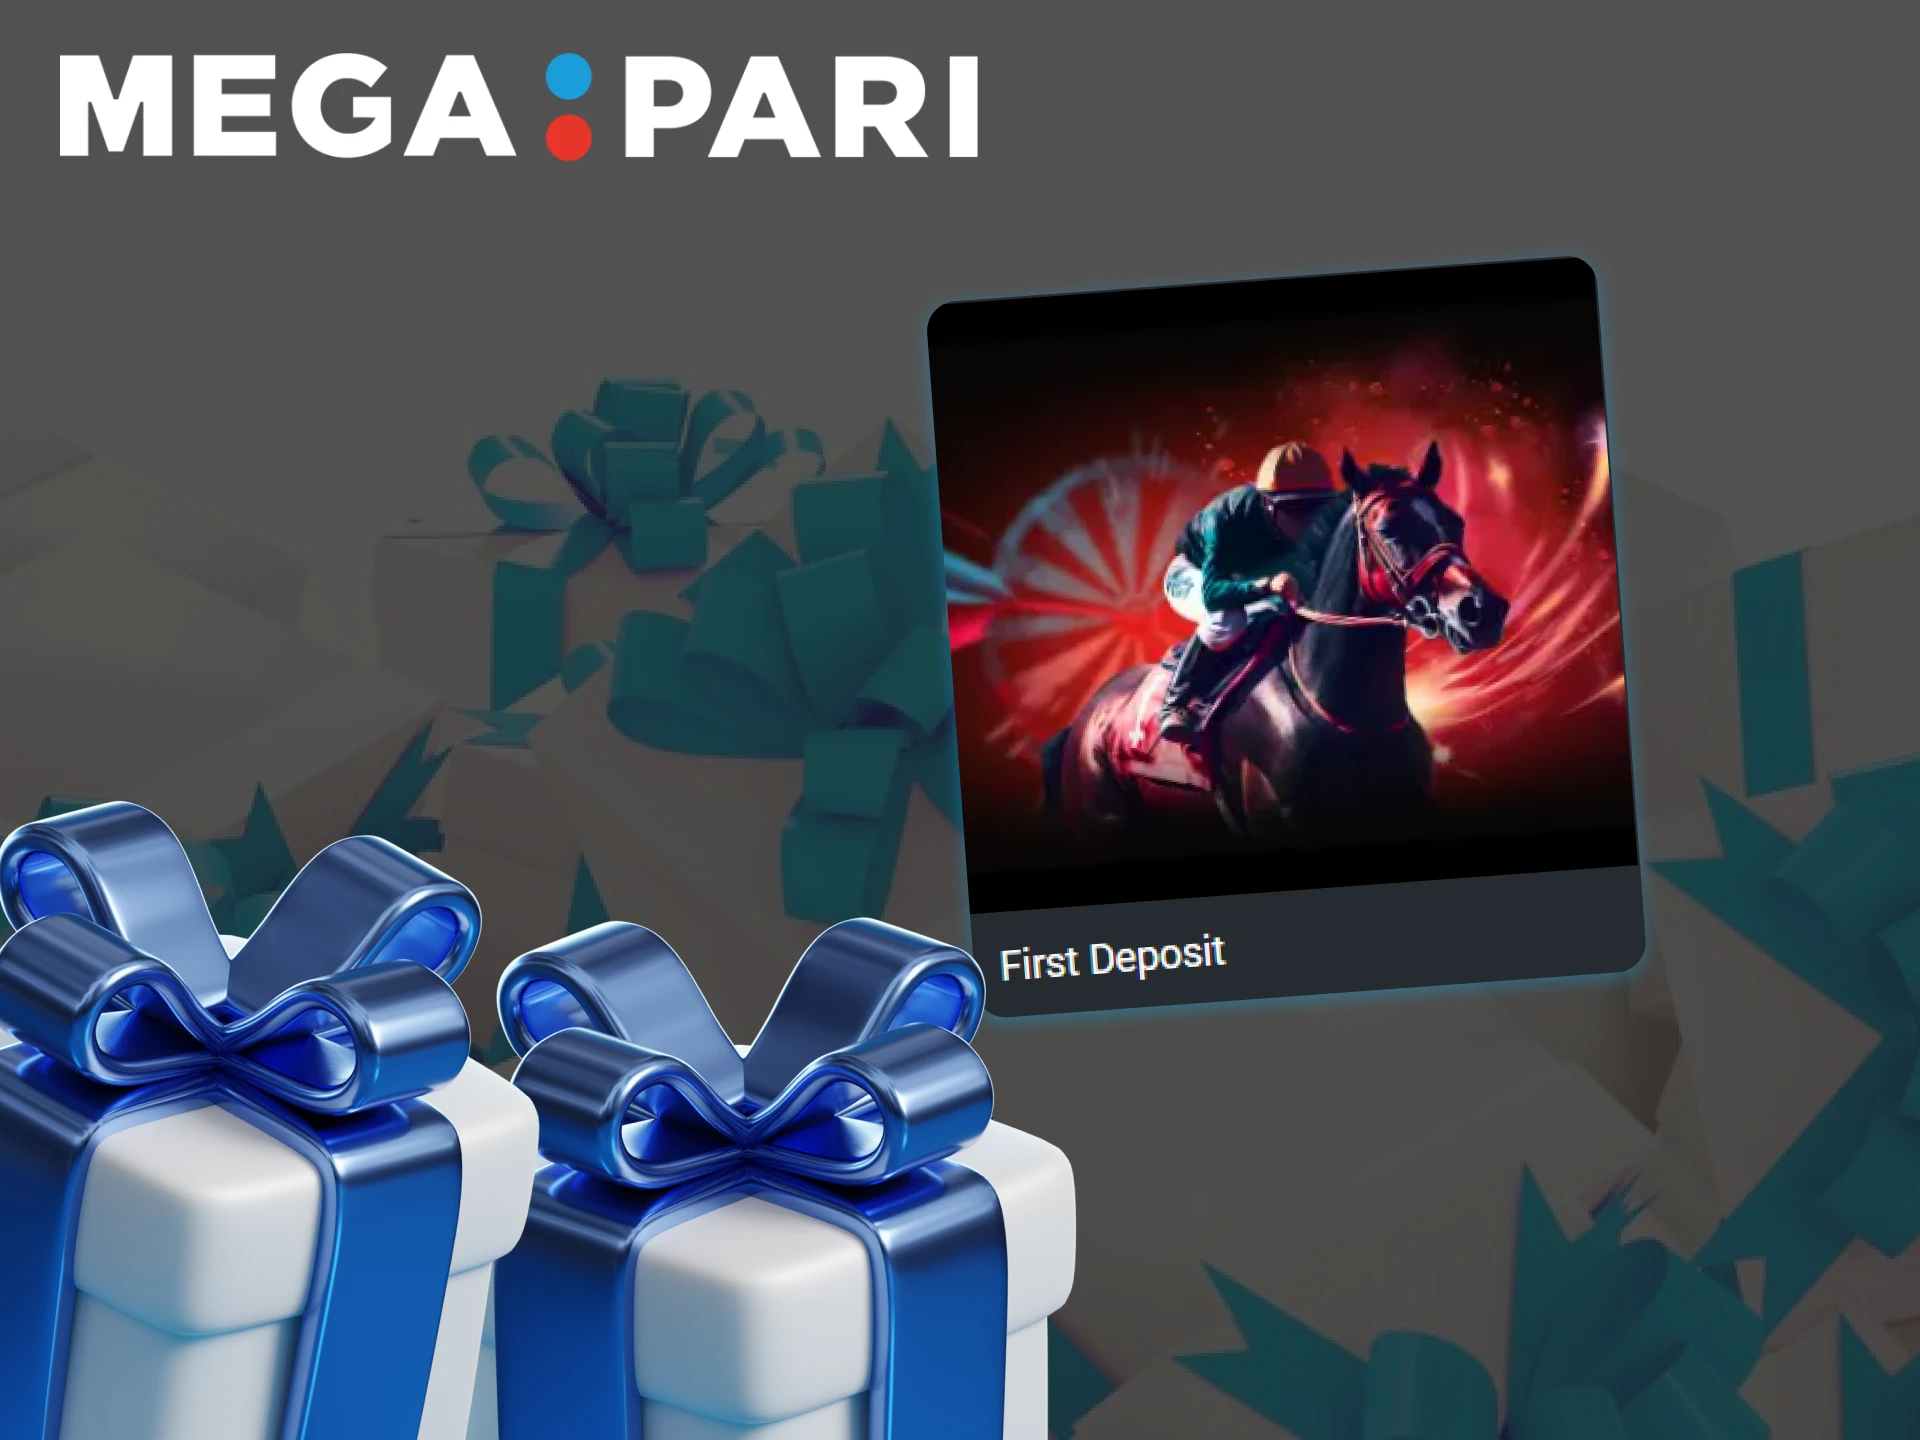 After registering with Megapari you will receive a nice welcome bonus for sports and casino activities.